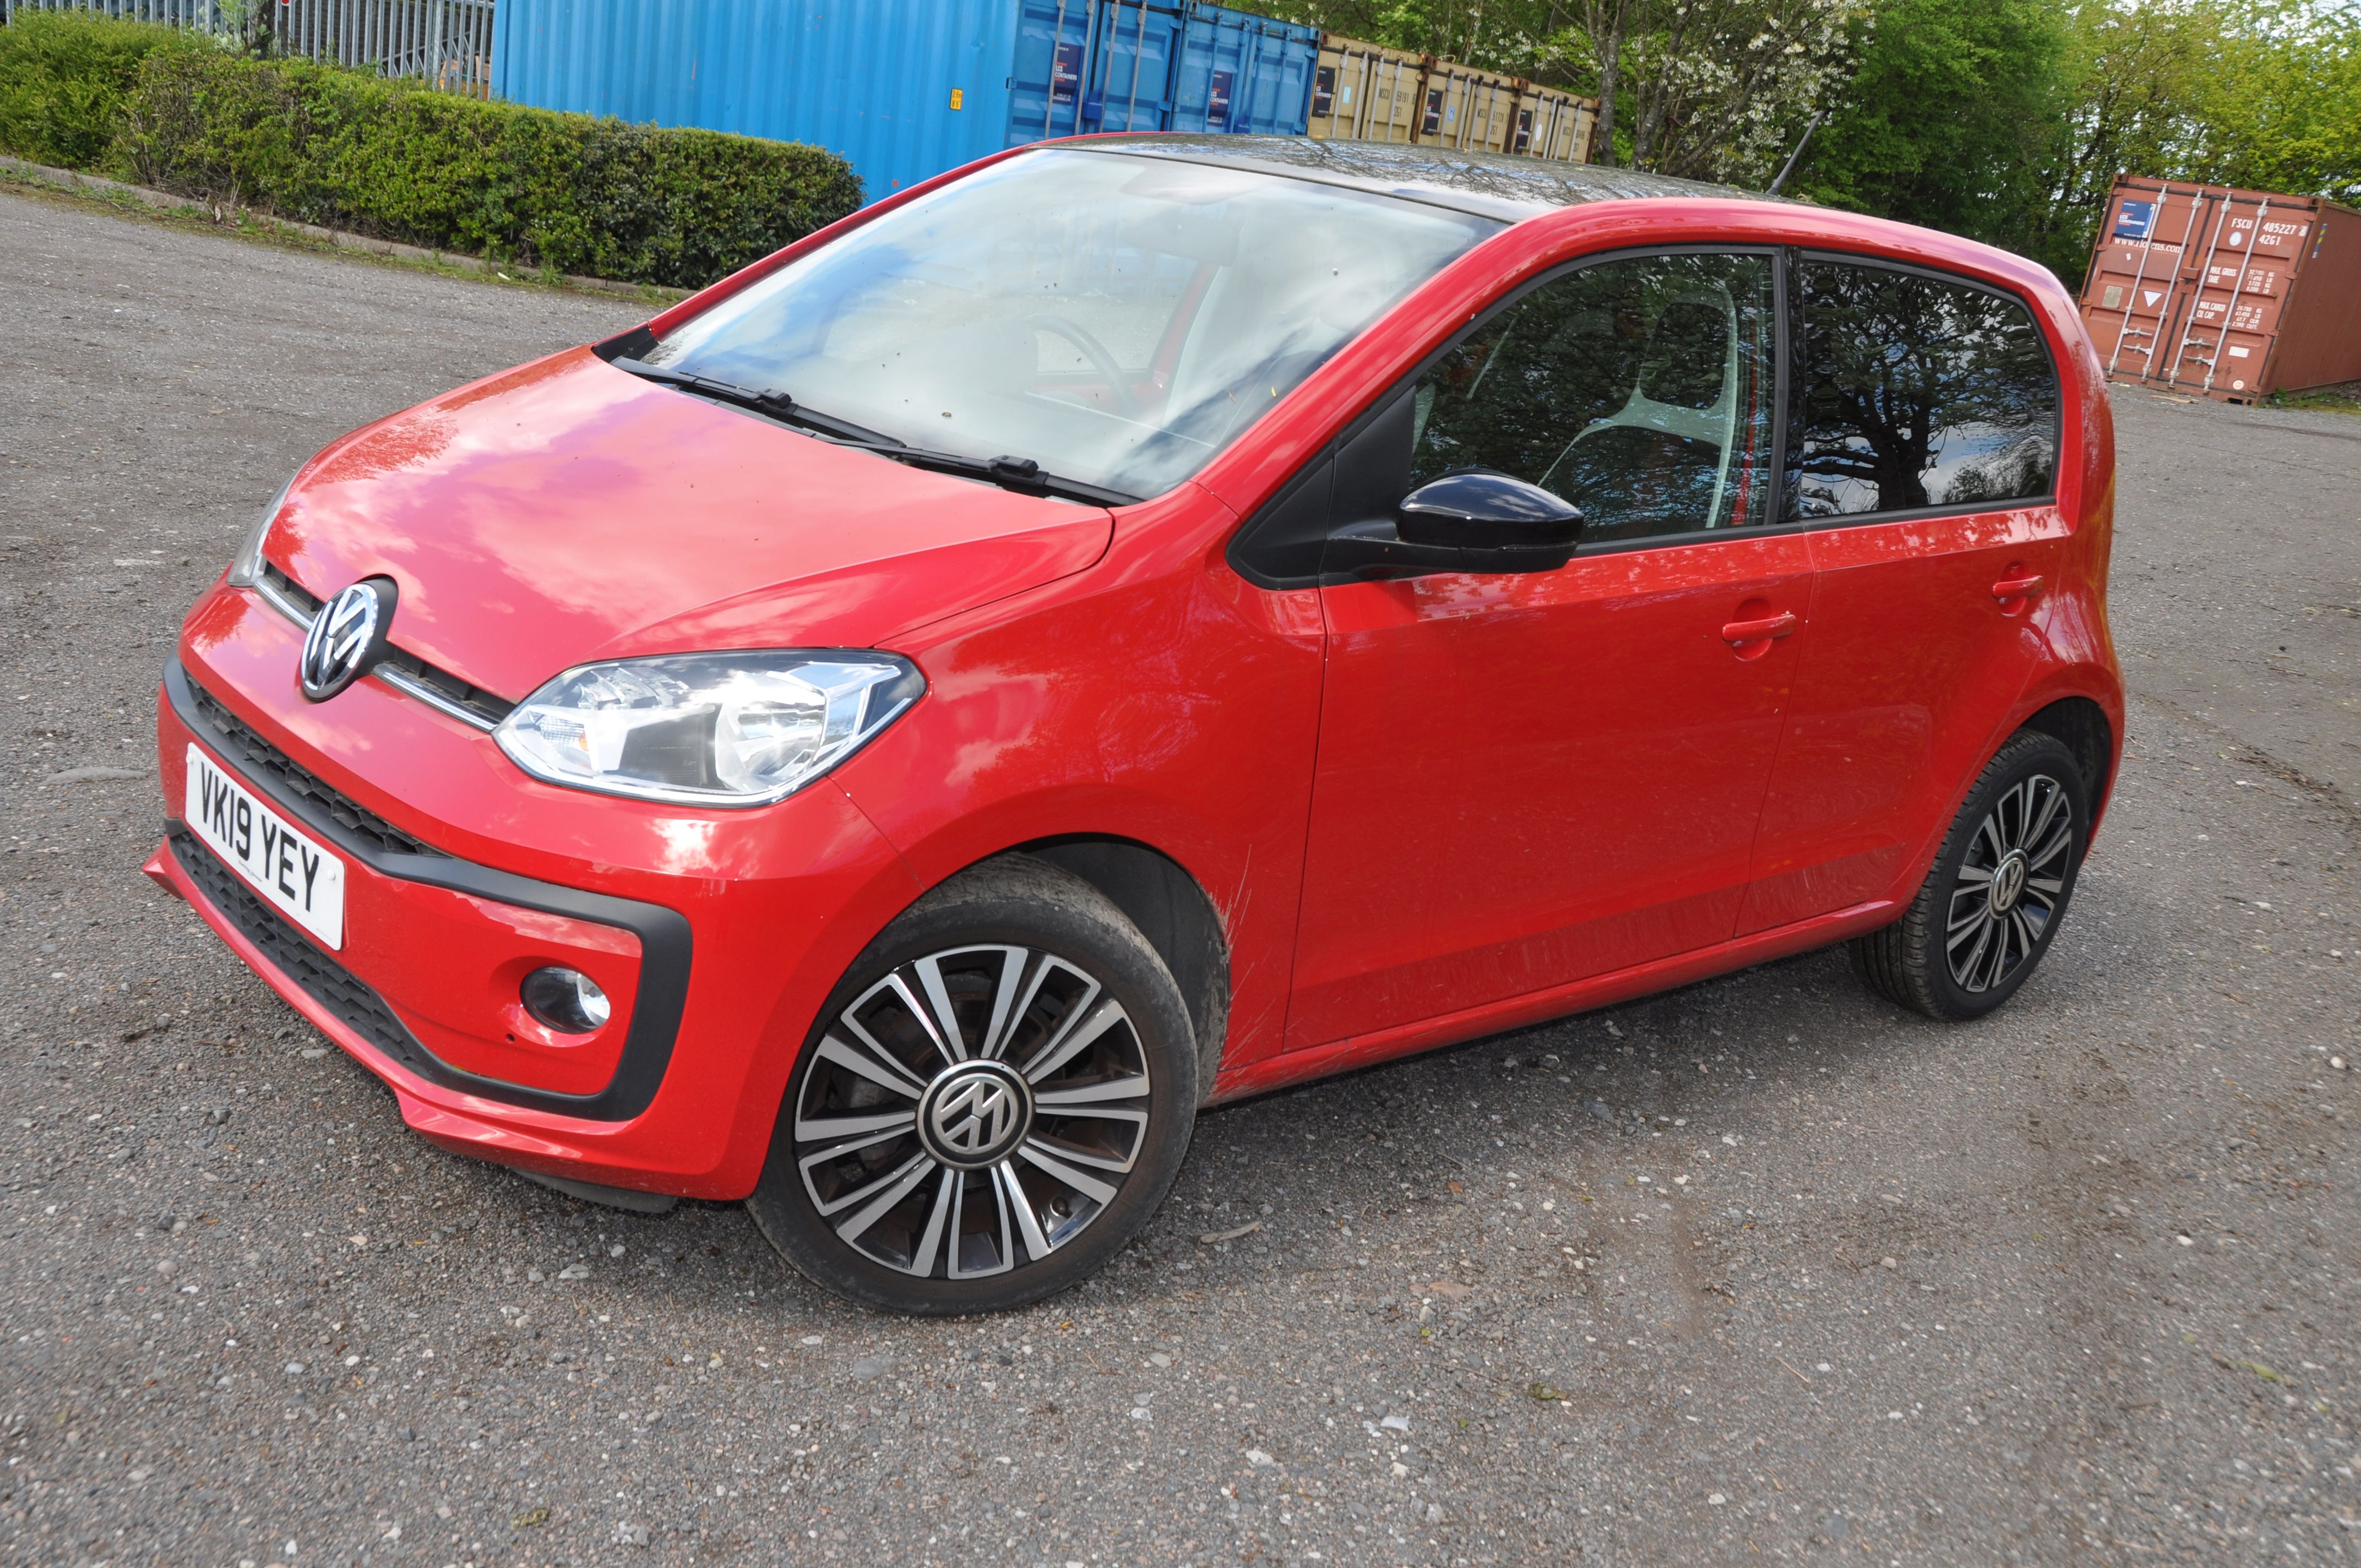 A 2019 VW UP 5 DOOR HATCHBACK CAR IN RED. 999cc petrol engine, 5 speed manual gearbox, V5c - Image 2 of 9